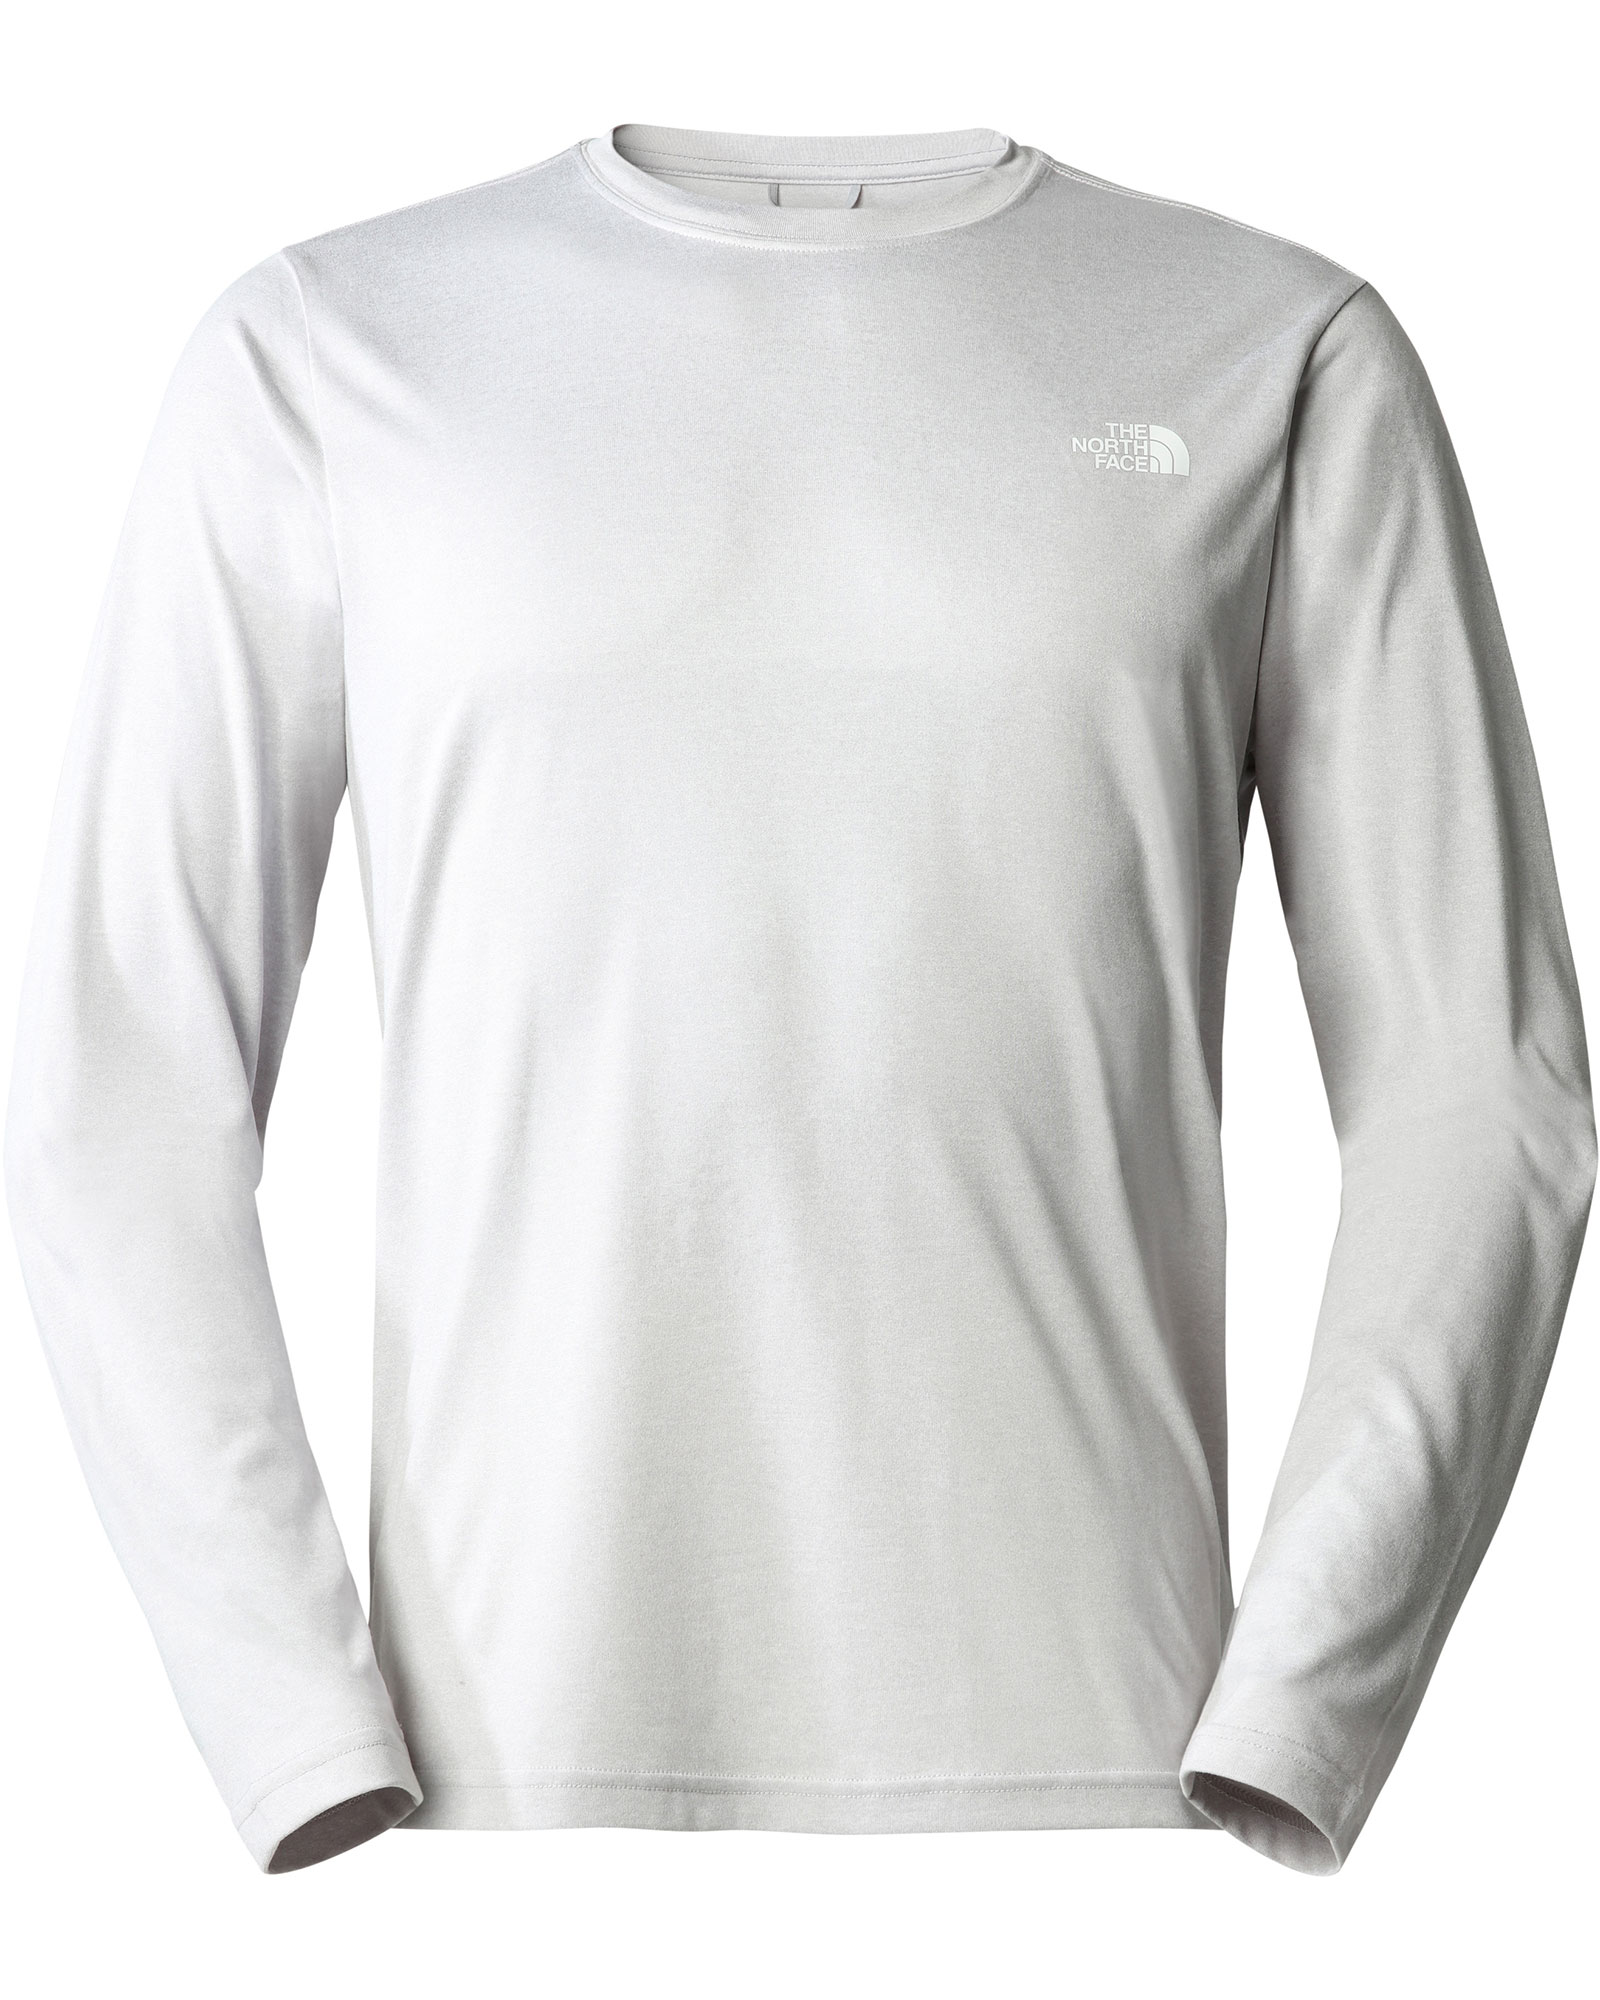 The North Face Men’s Reaxion Amp Long Sleeved Crew T Shirt - TNF Light Grey Heather L